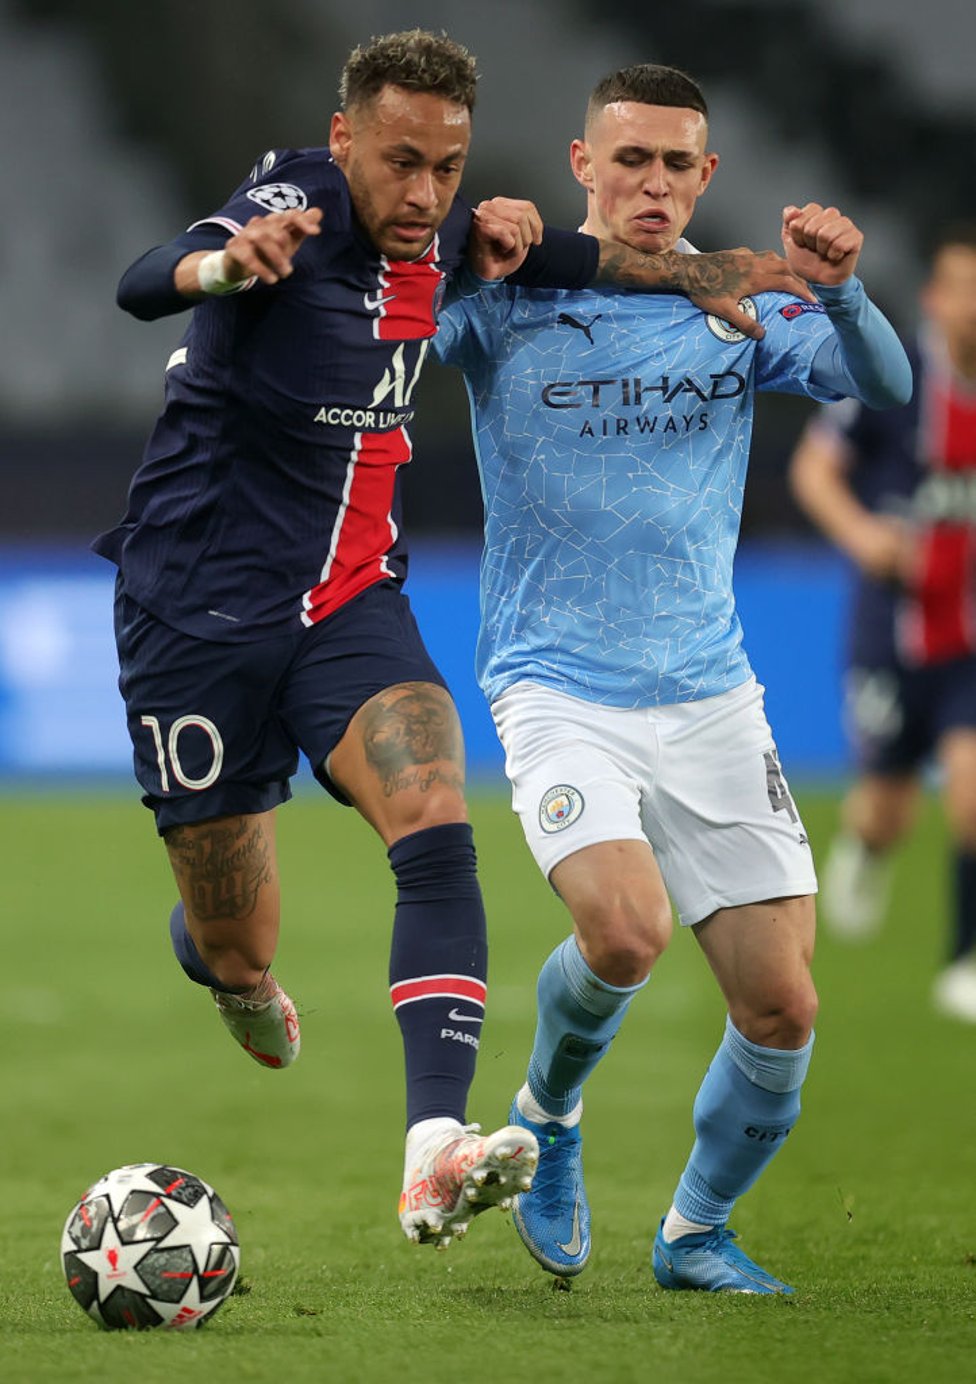 MIDFIELD BATTLE: Phil Foden and Neymar tussle for possession